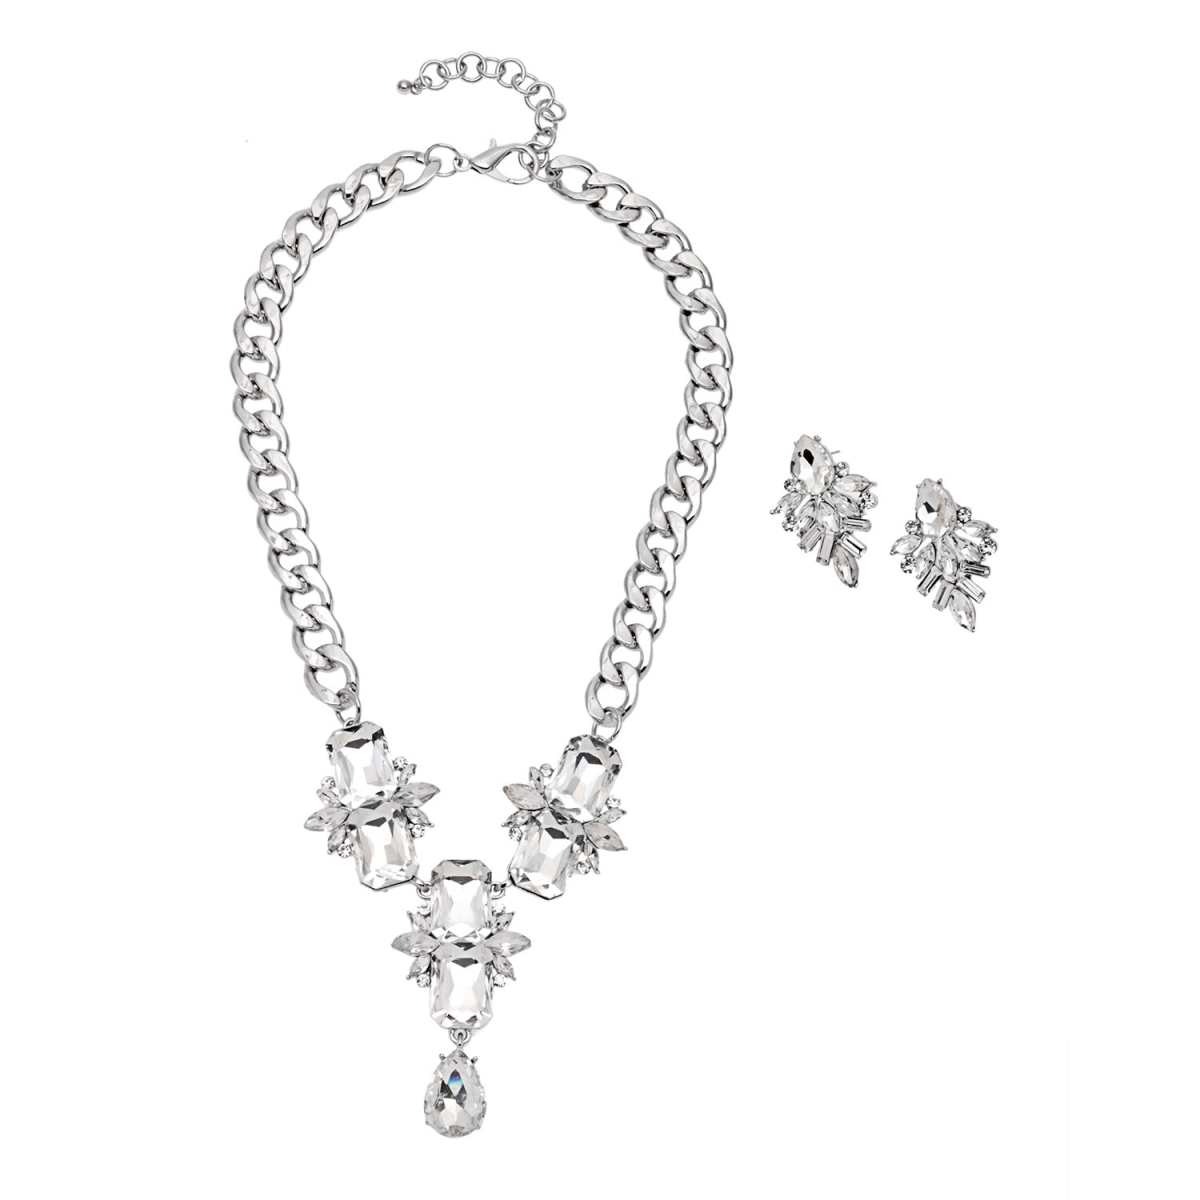 Picture of J&H Designs 7836-NE-Crystal Silvertone Crystal Pendant Necklace and Earrings Set